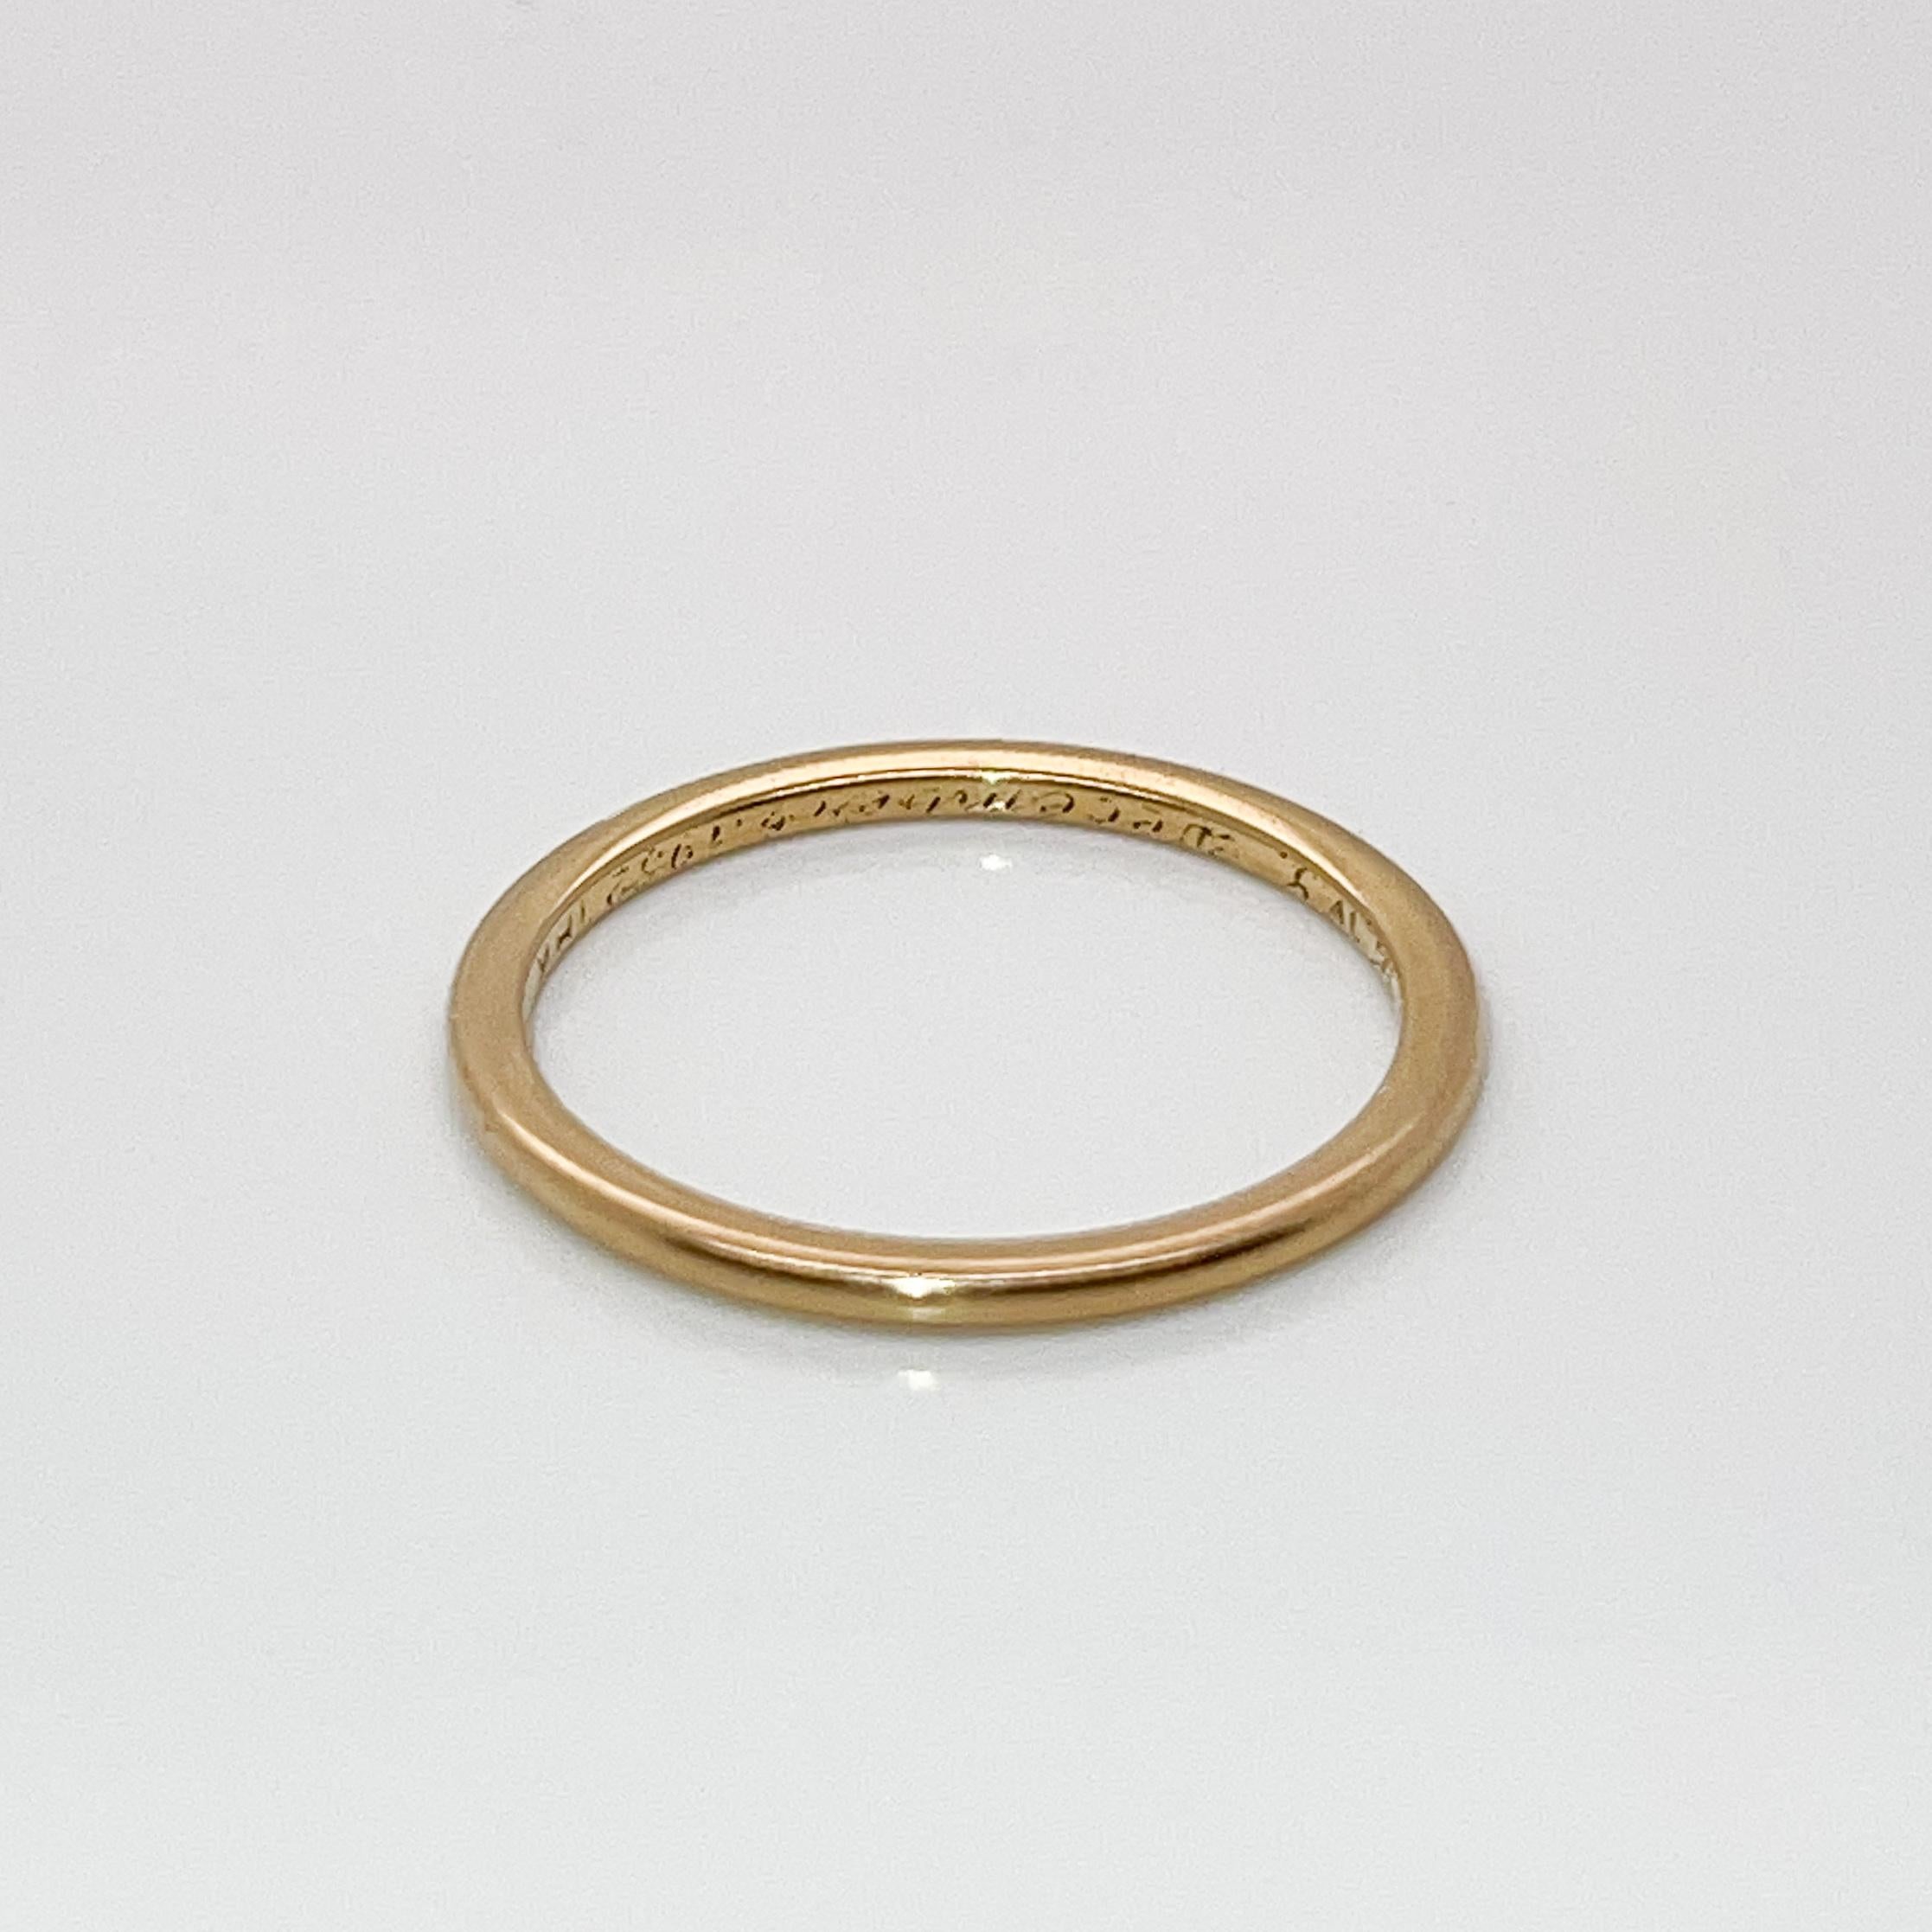 Tiffany & Co. Thin 18 Karat Wedding Band or Ring In Good Condition For Sale In Philadelphia, PA